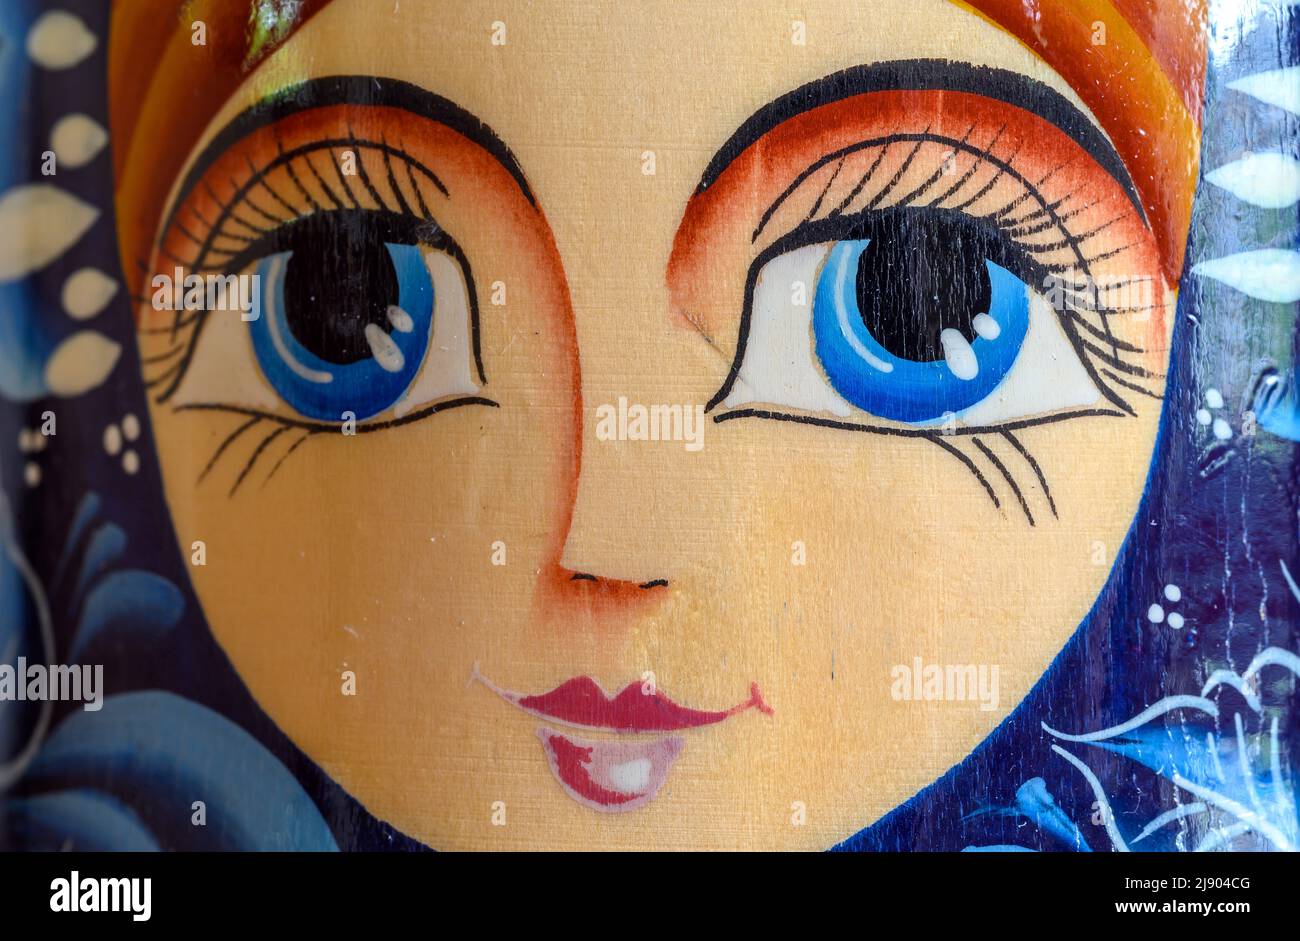 Detail of the face of a Matryoshka doll or Russian doll. This nesting doll is comprised of ten stacked figures. The doll is a generic souvenir. Stock Photo